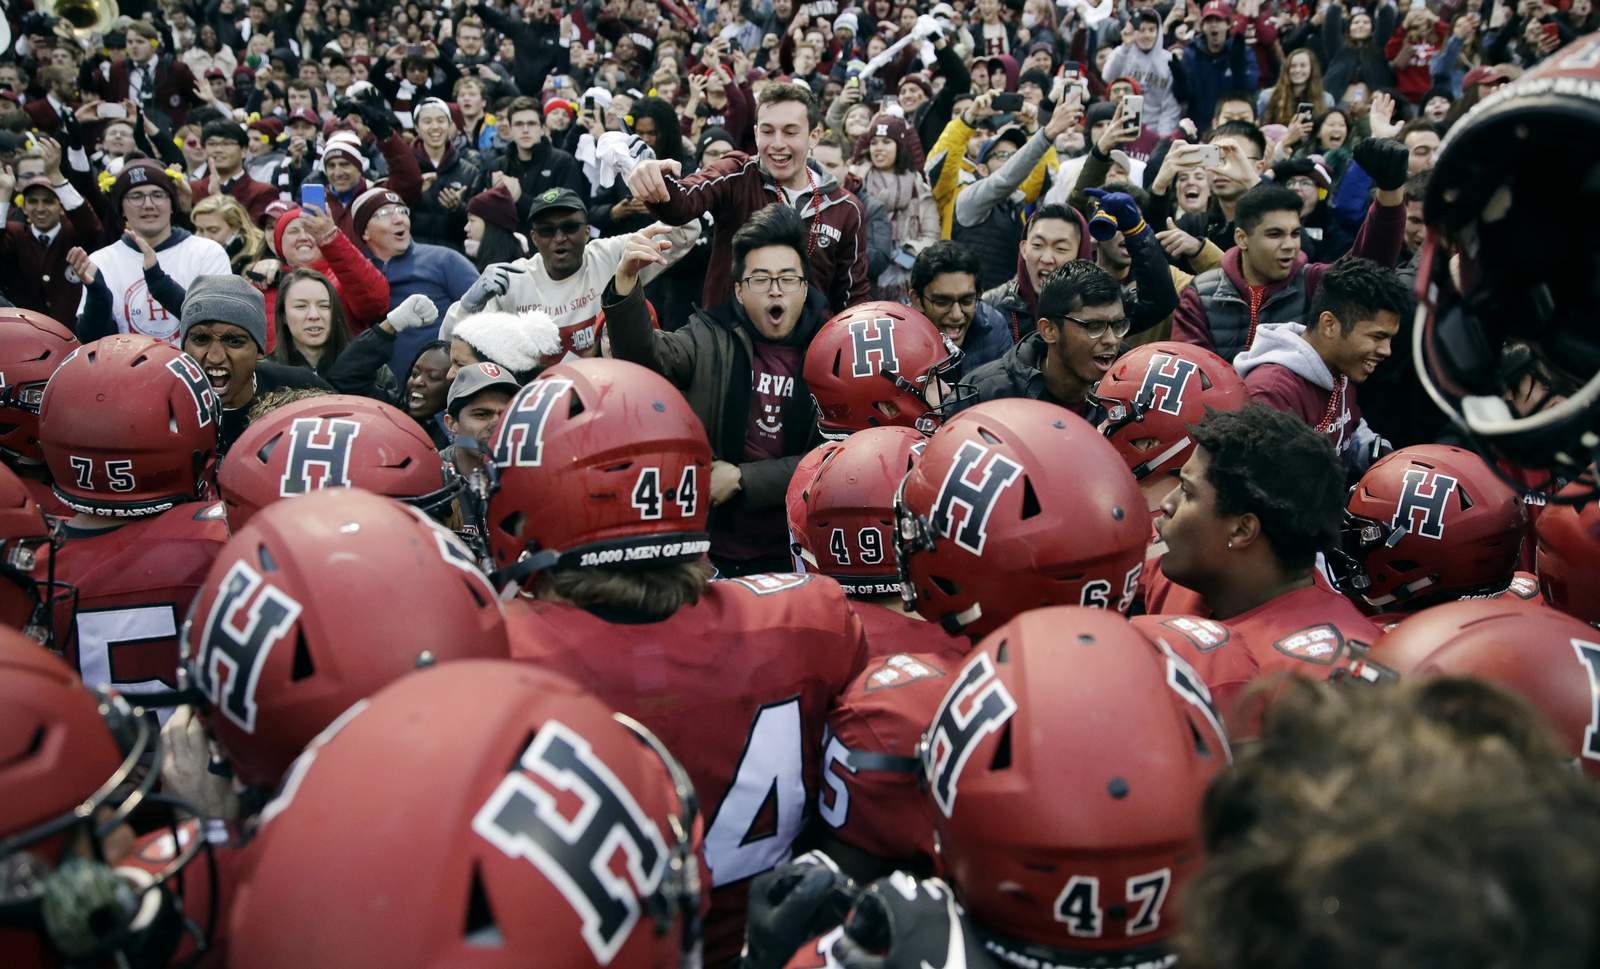 AP Source: Ivy League calls off fall sports due to outbreak